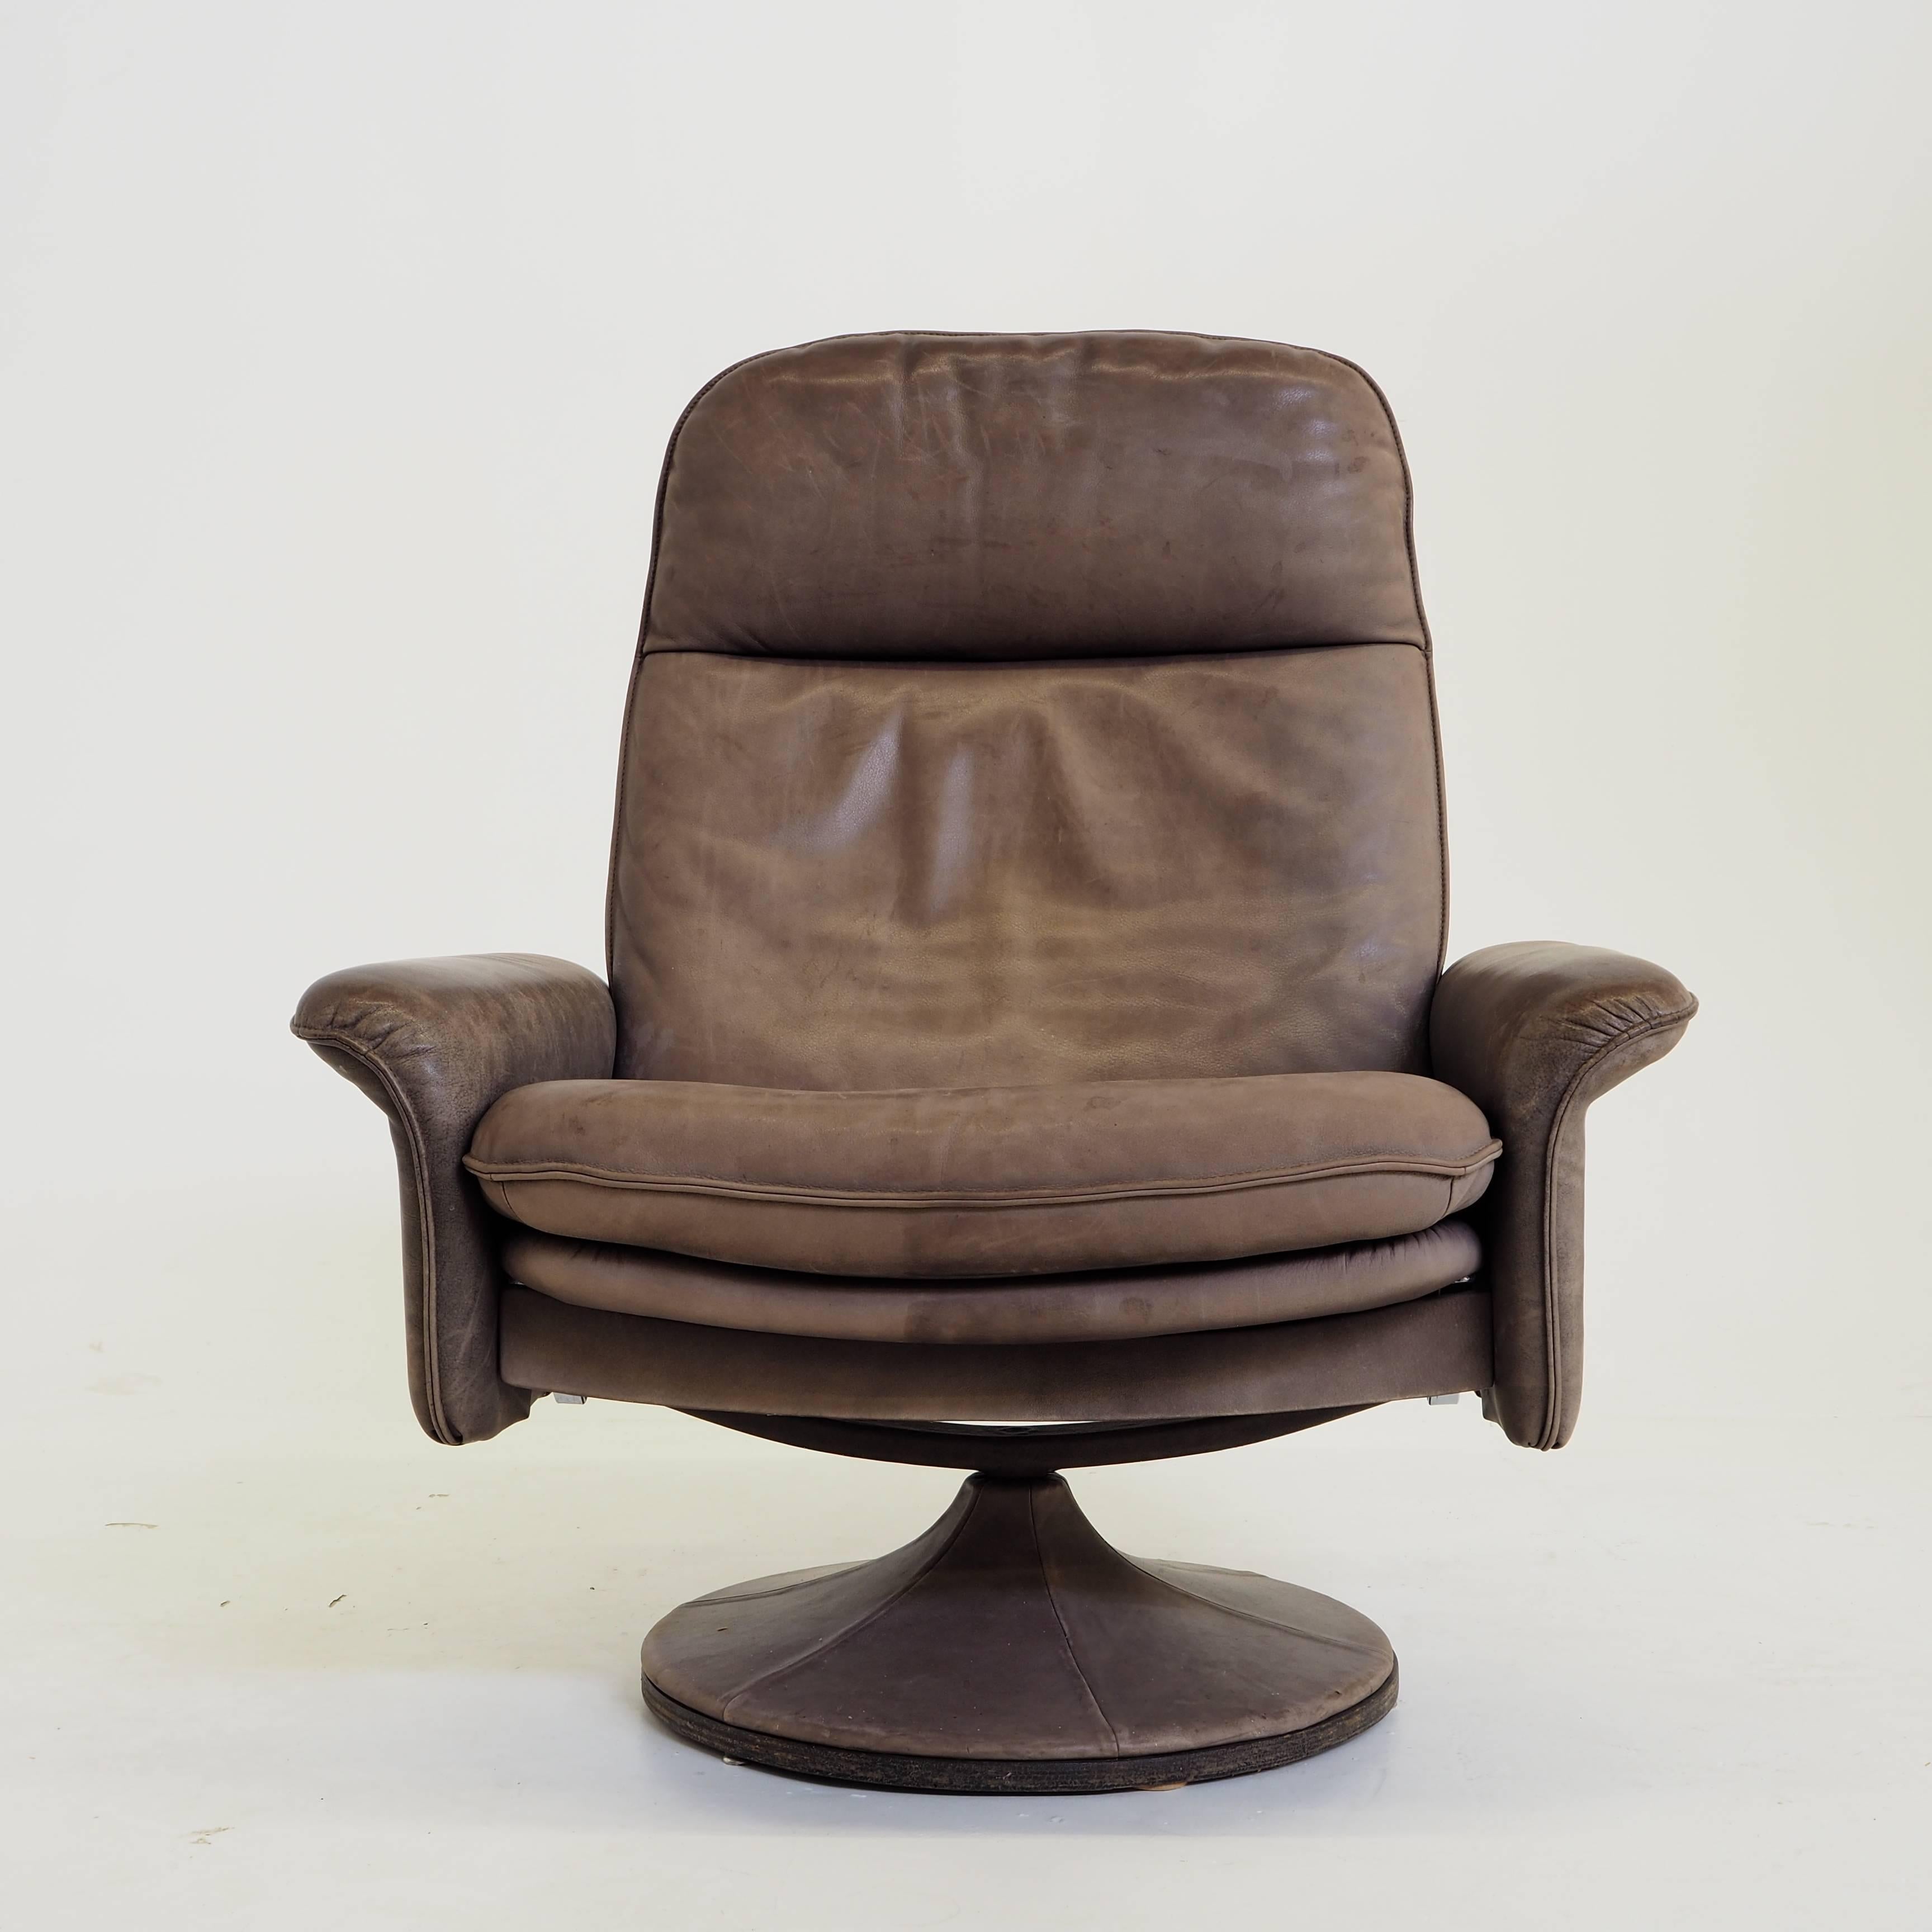 Beautiful De Sede swivel lounge chair model DS50 in thick buffalo neck leather with a perfect patina. Top quality from Switzerland. Two adjustable seat positions, stands on a round leather base.
We have two chairs available.
   